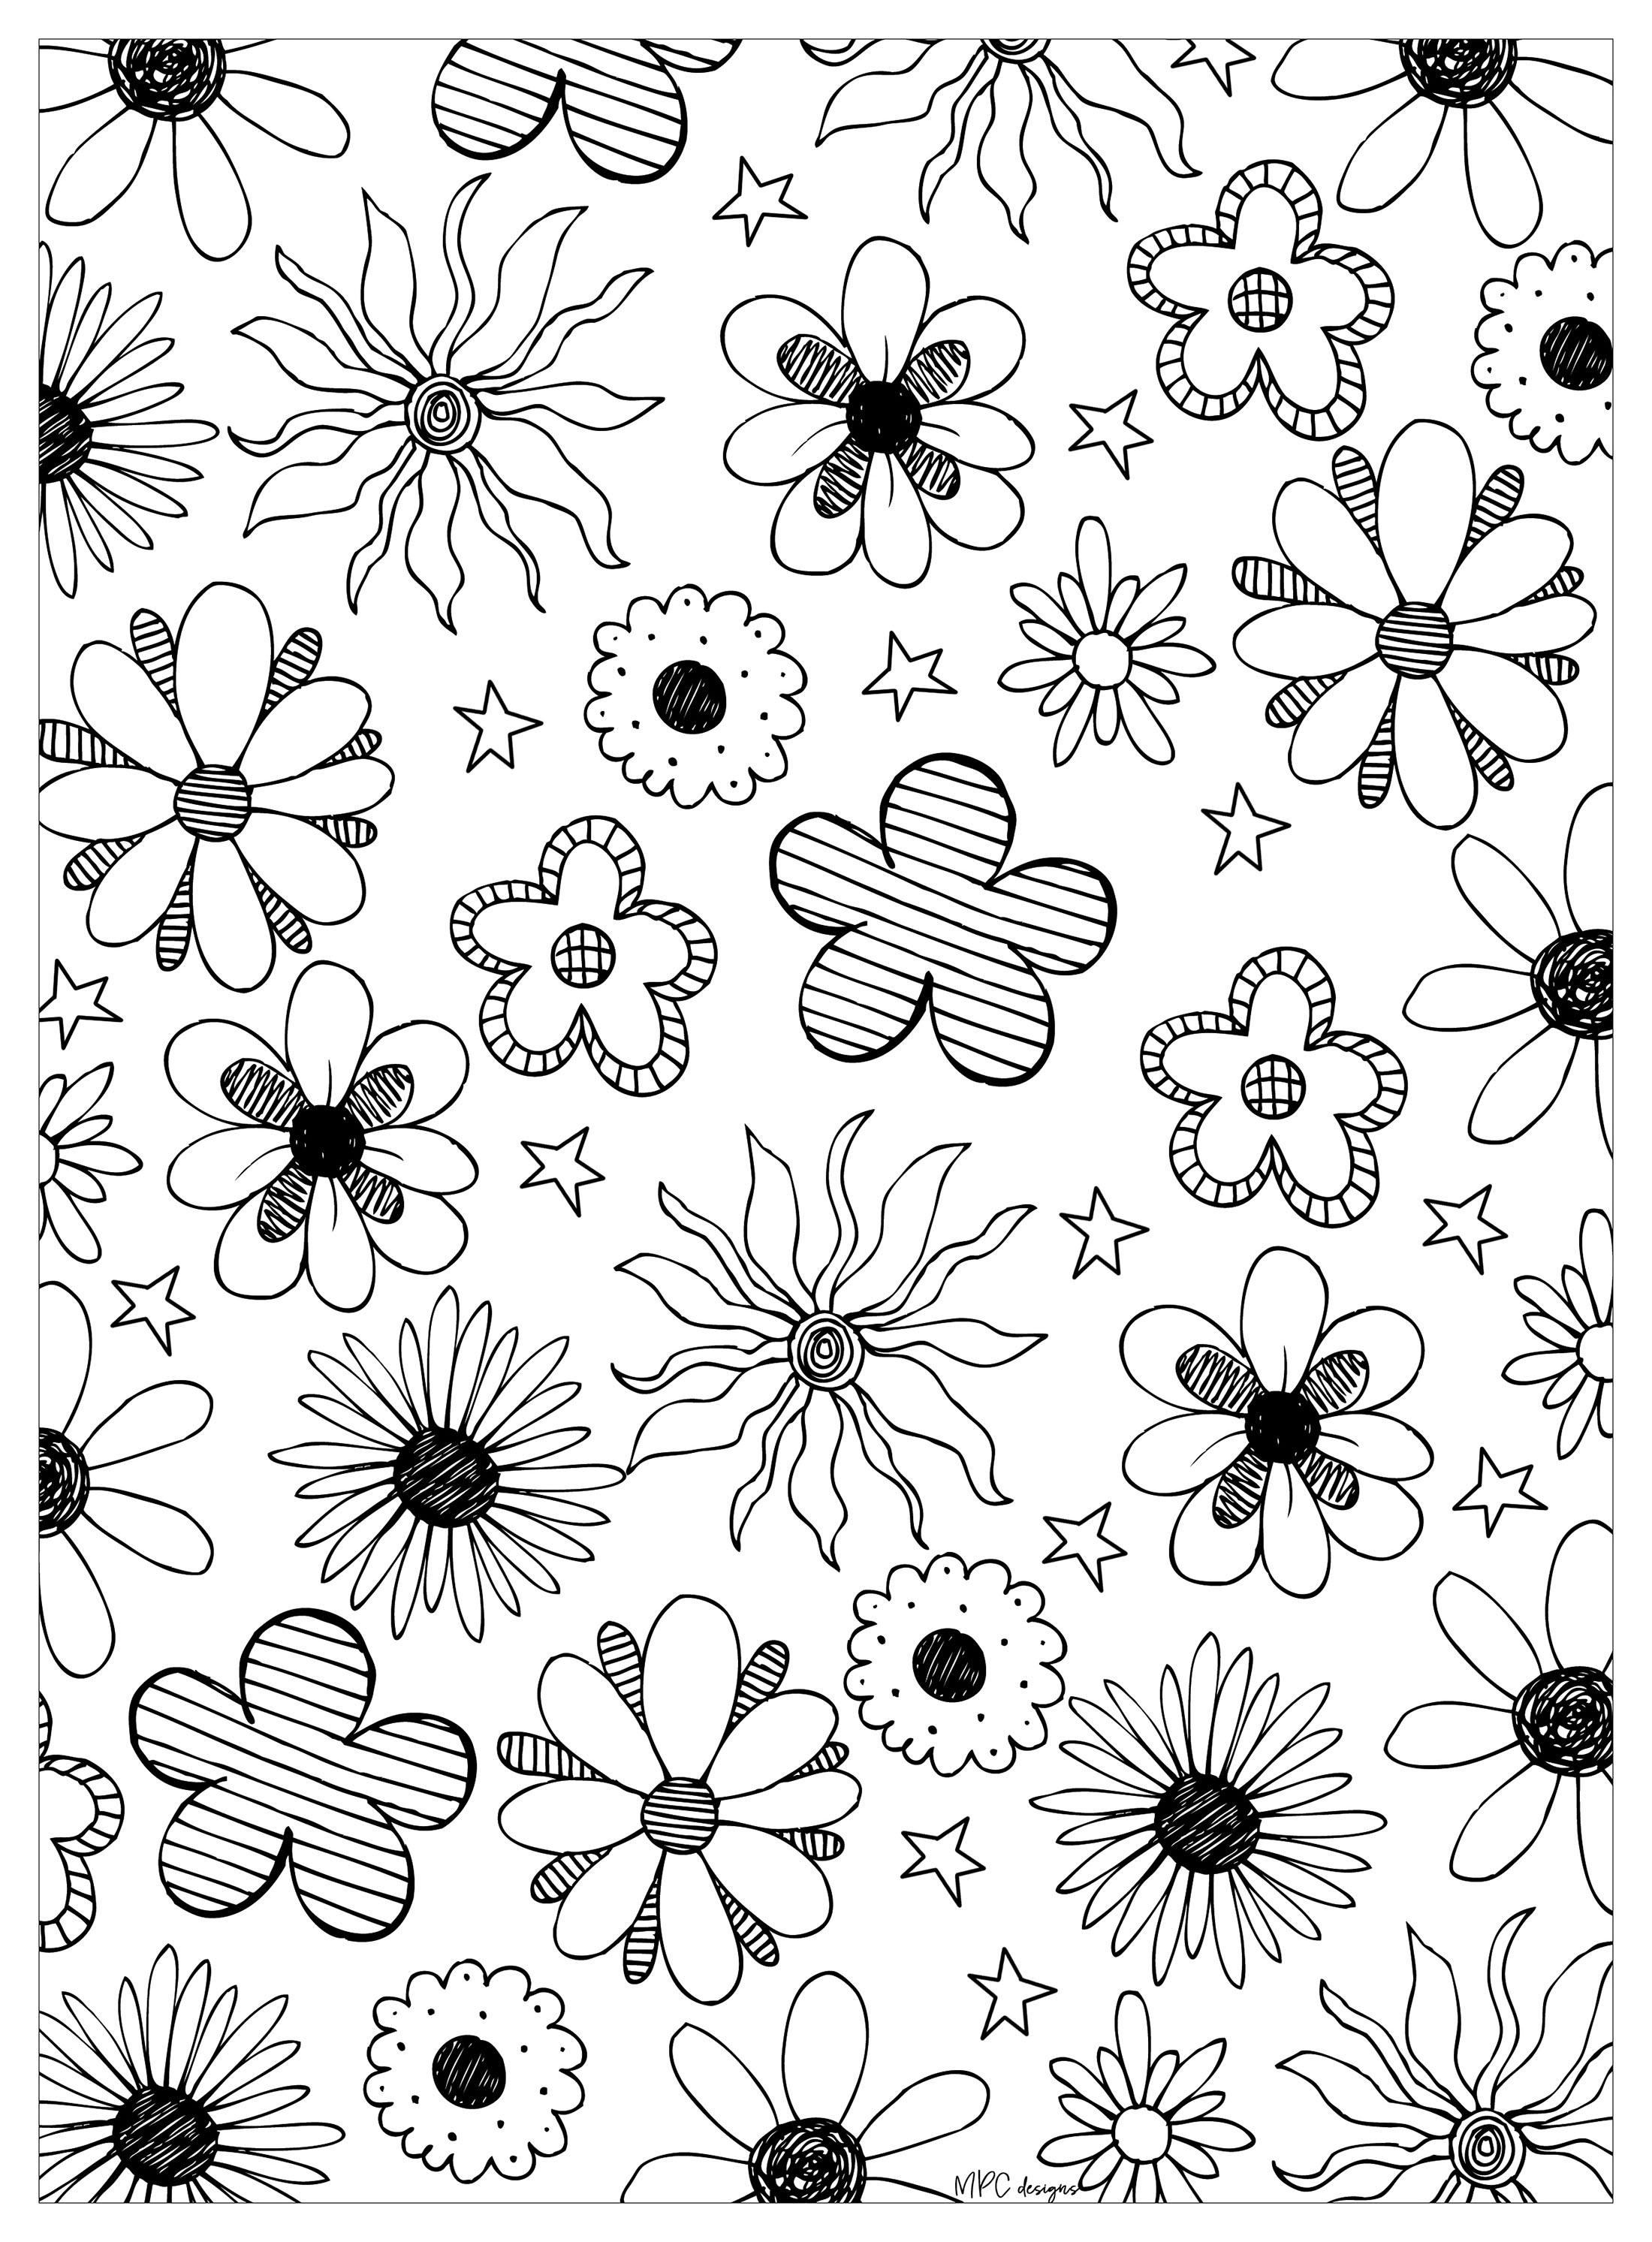 flowers-mpc-design-flowers-kids-coloring-pages